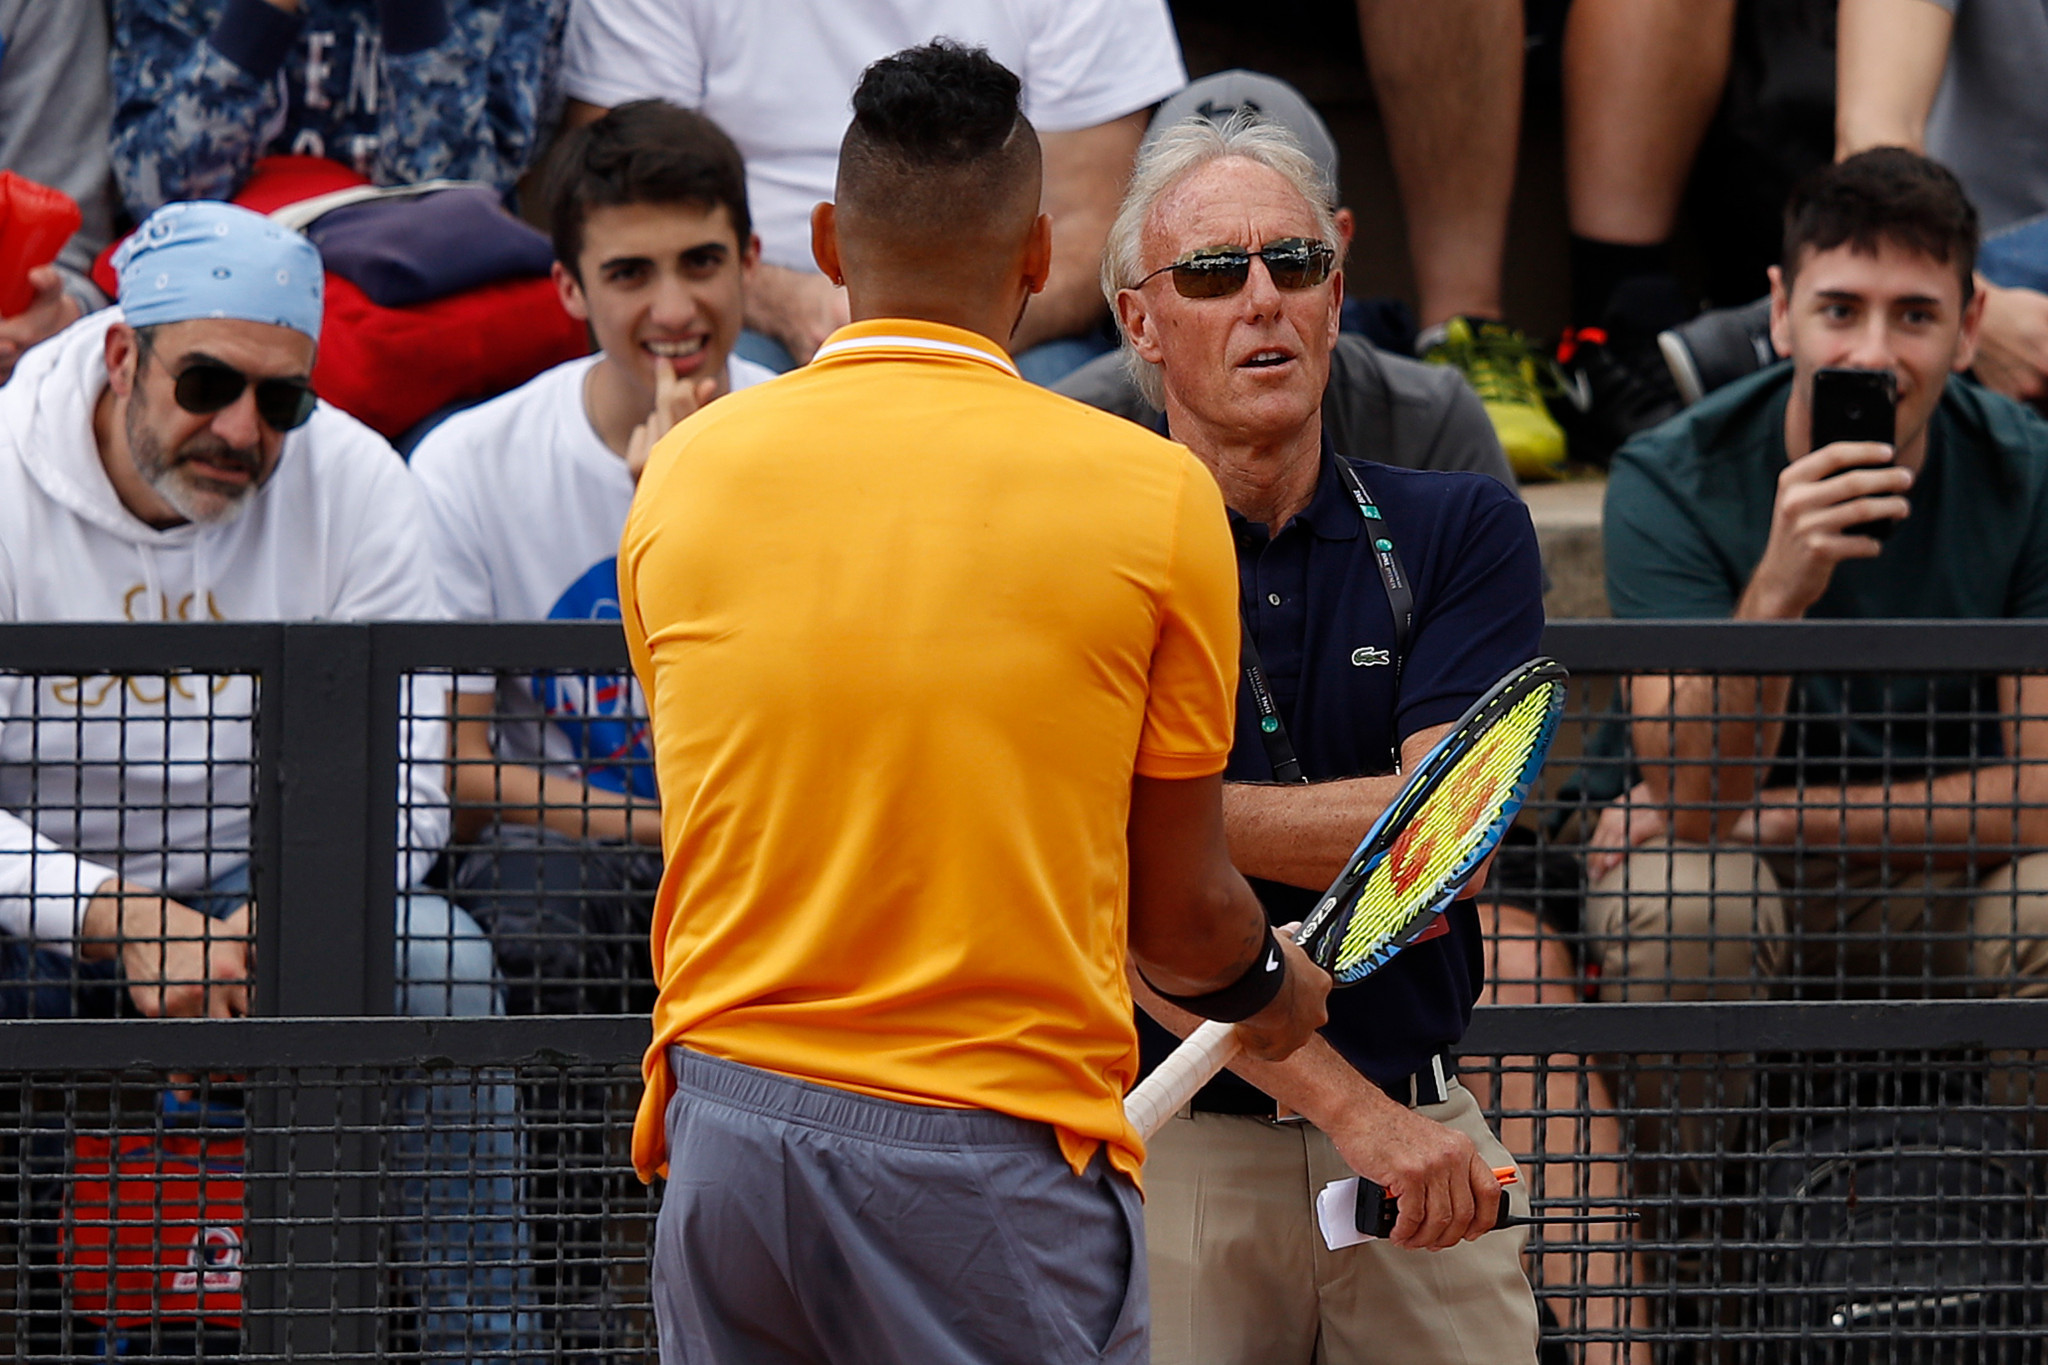 Kyrgios defaults after storming off court in second-round match at Italian Open